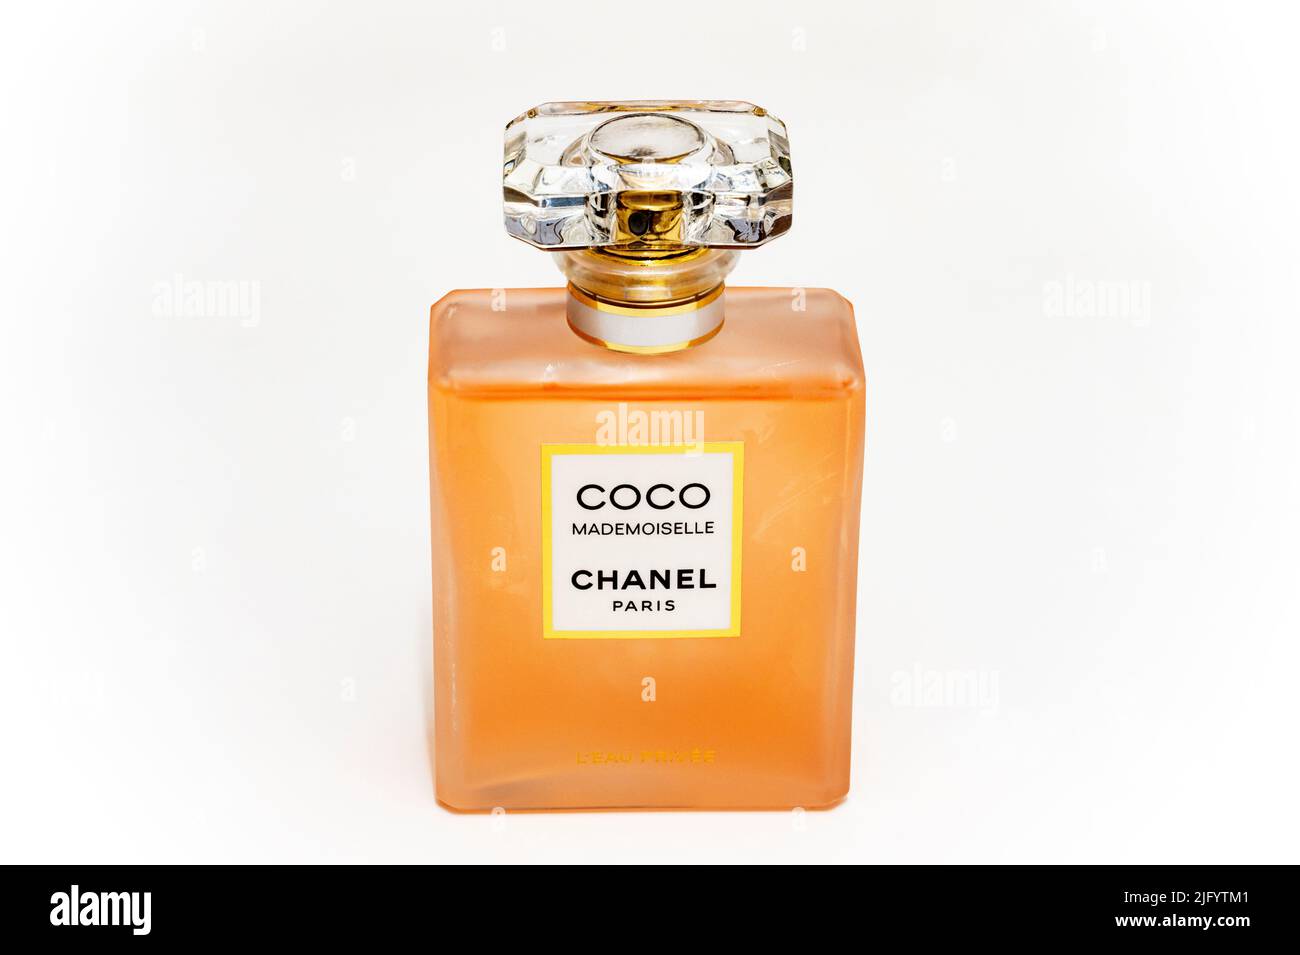 Coco Chanel Mademoiselle Banque D'Images